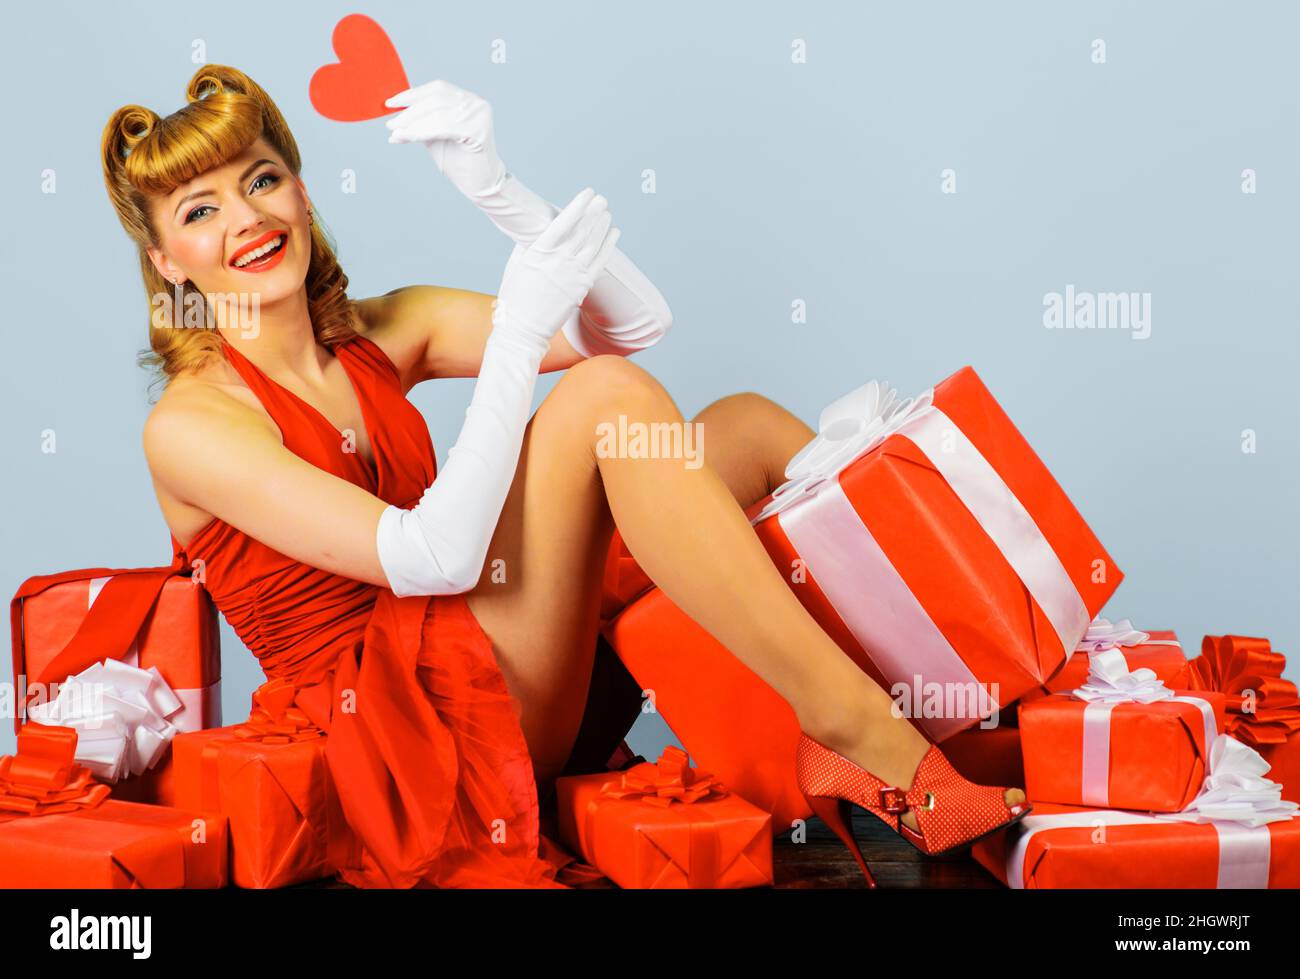 Valentines Day. Woman with red heart. February 14. Love. Smiling girl in red dress with Present box. Stock Photo